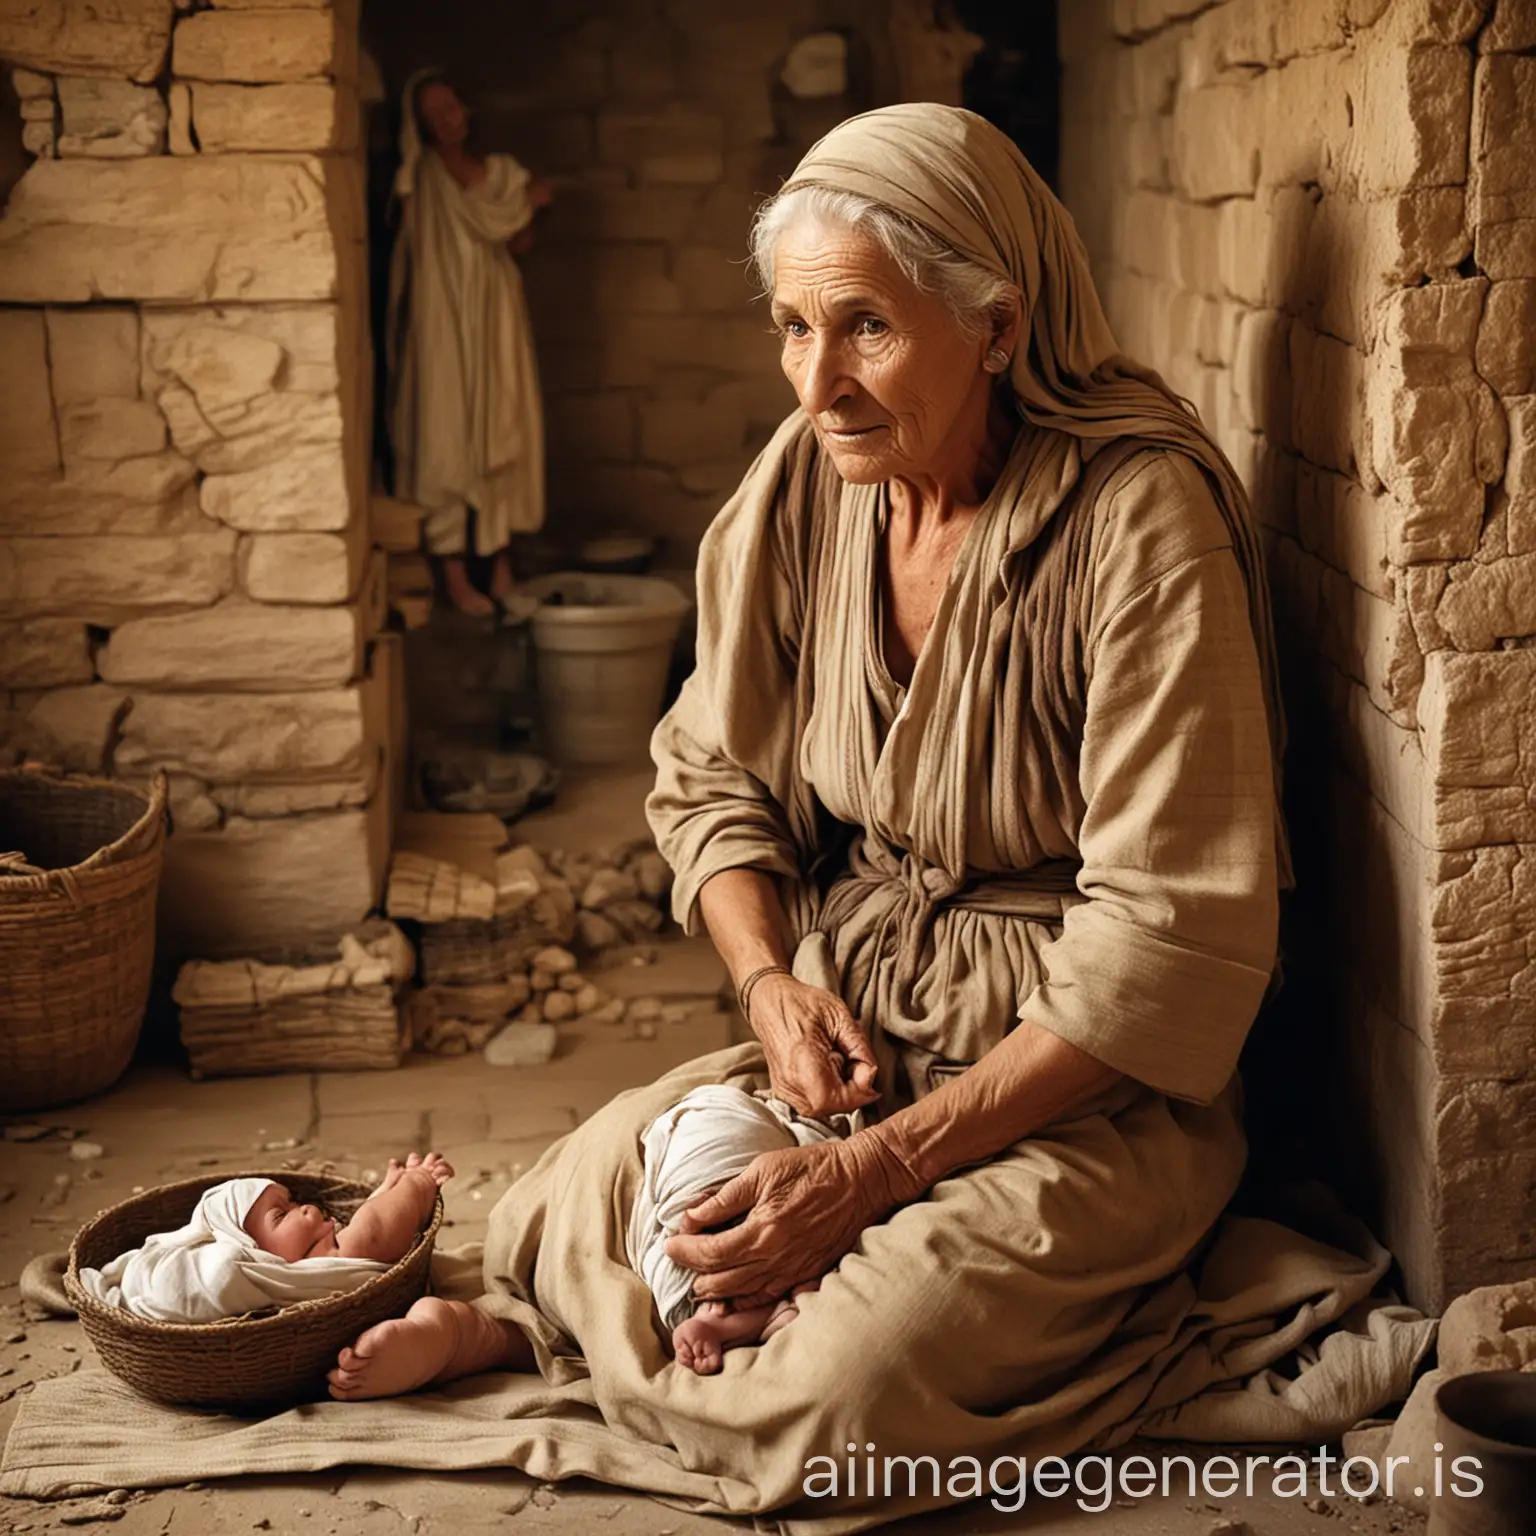 3000 BC. Ancient Israel. 90 year old woman looking after baby at home.